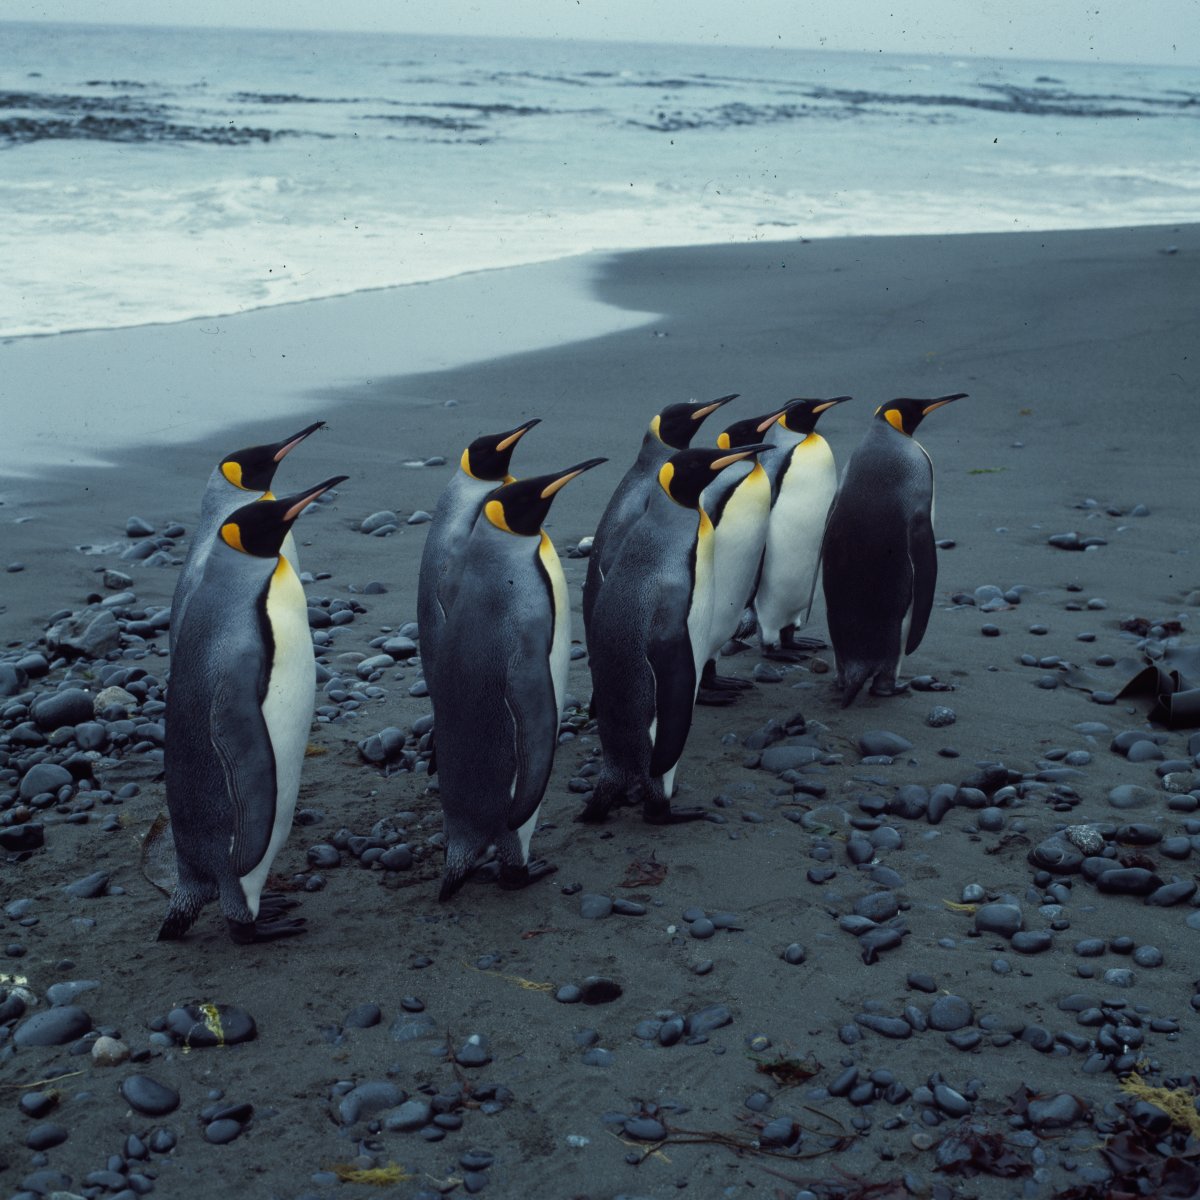 Nine King Penguins are standing on a grey bleak looking beach among sand and pebbles. The ocean is grey/white behind them.